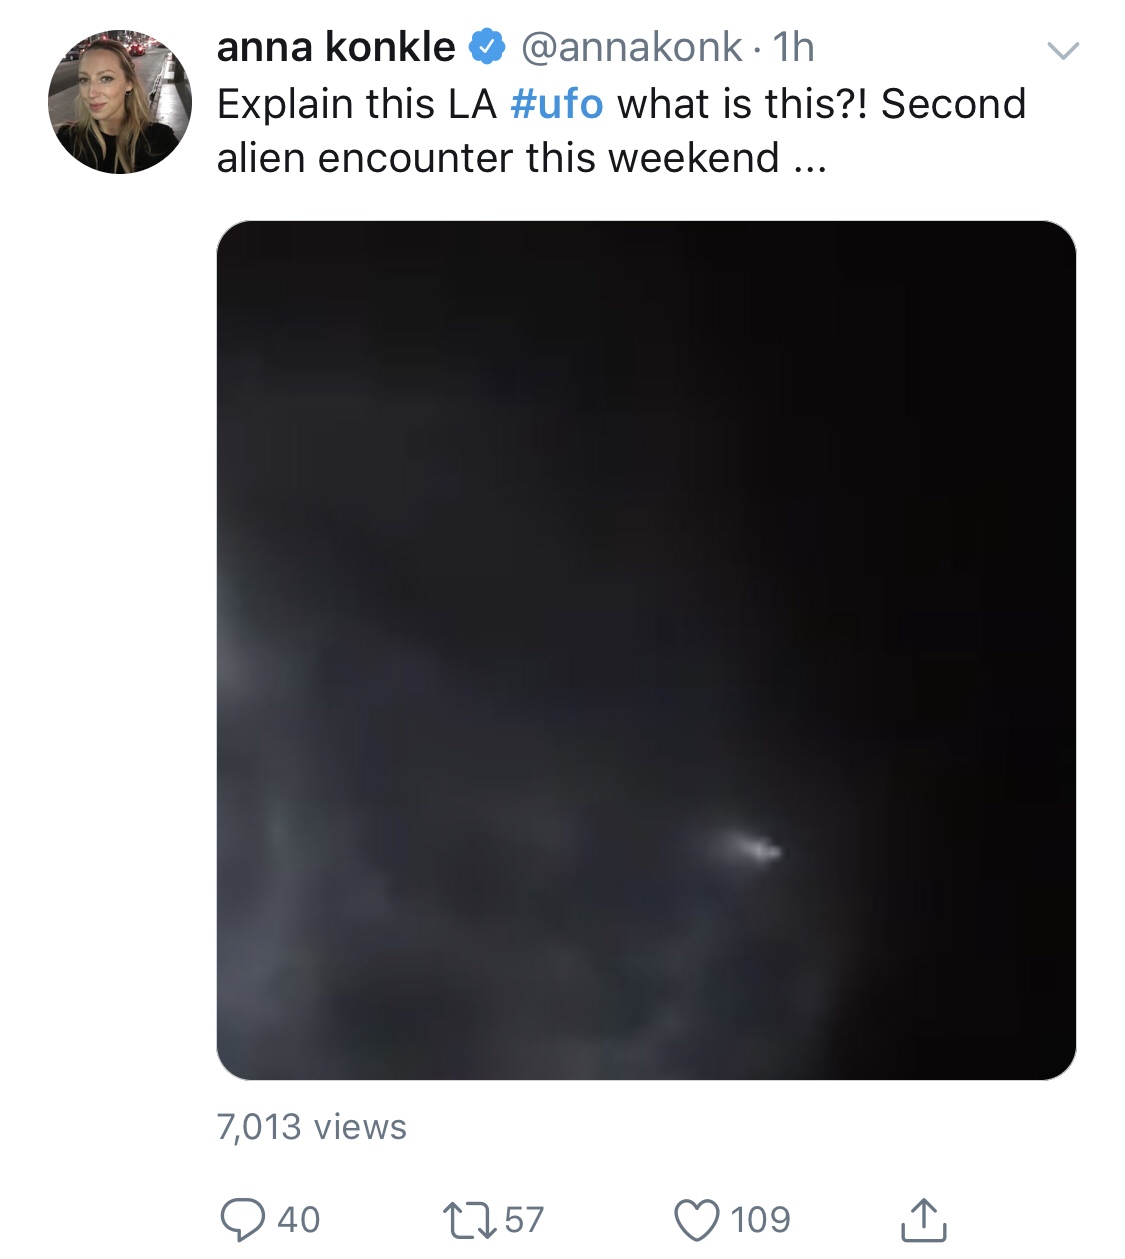 People all over LA are mistaking Tesla's Flacon 9 launch as a UFO